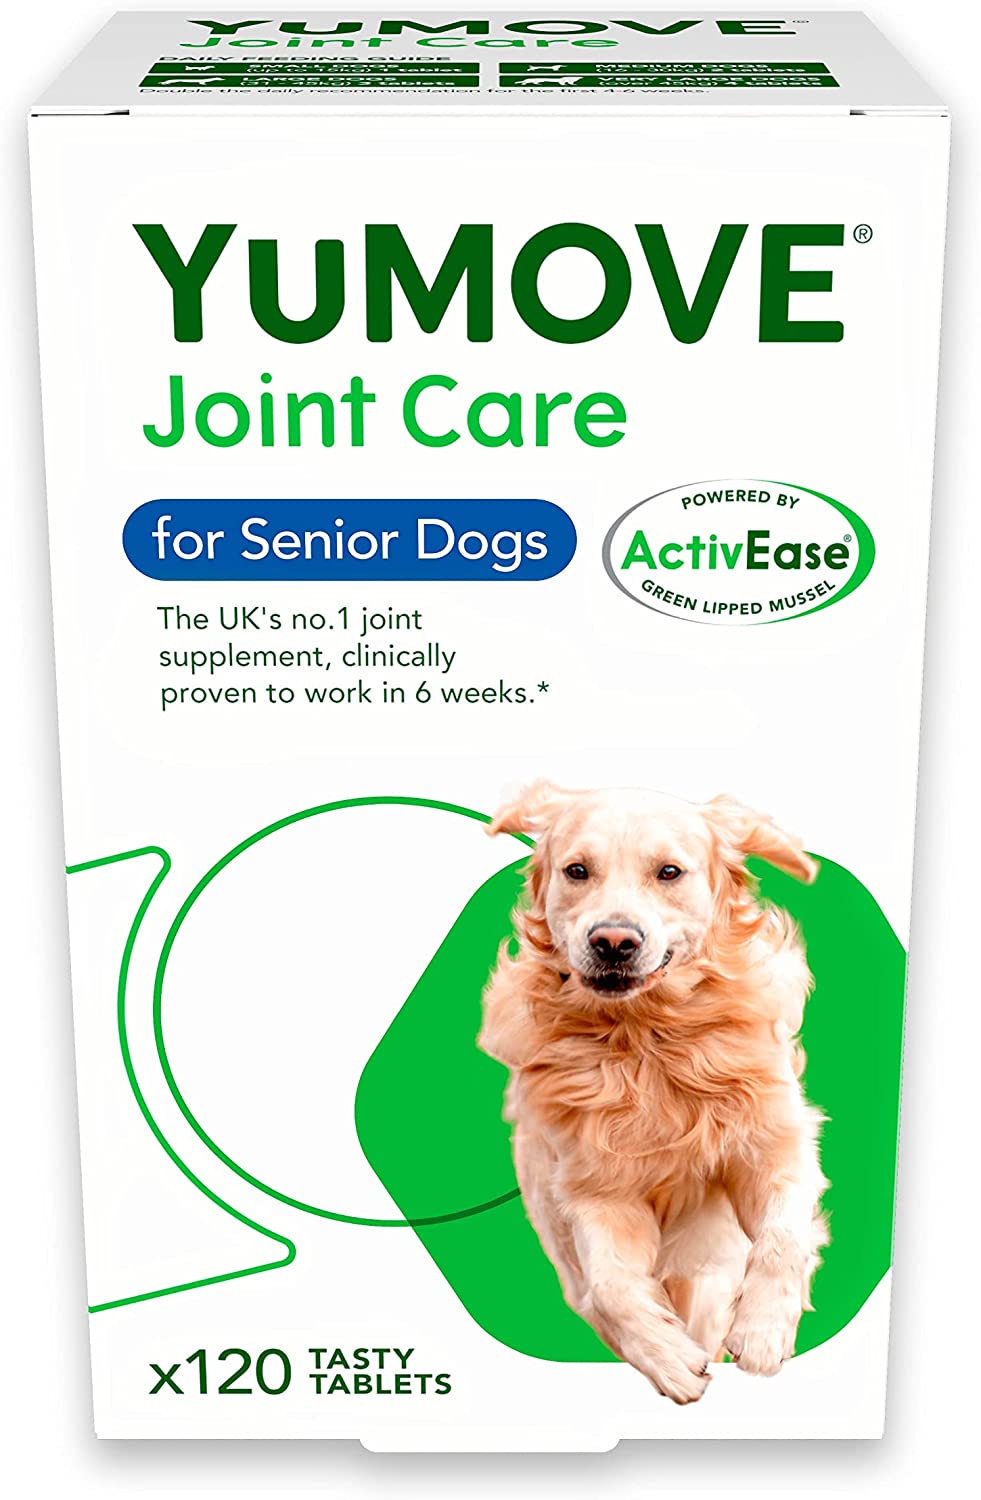 YuMOVE Joint Care for Senior Dogs